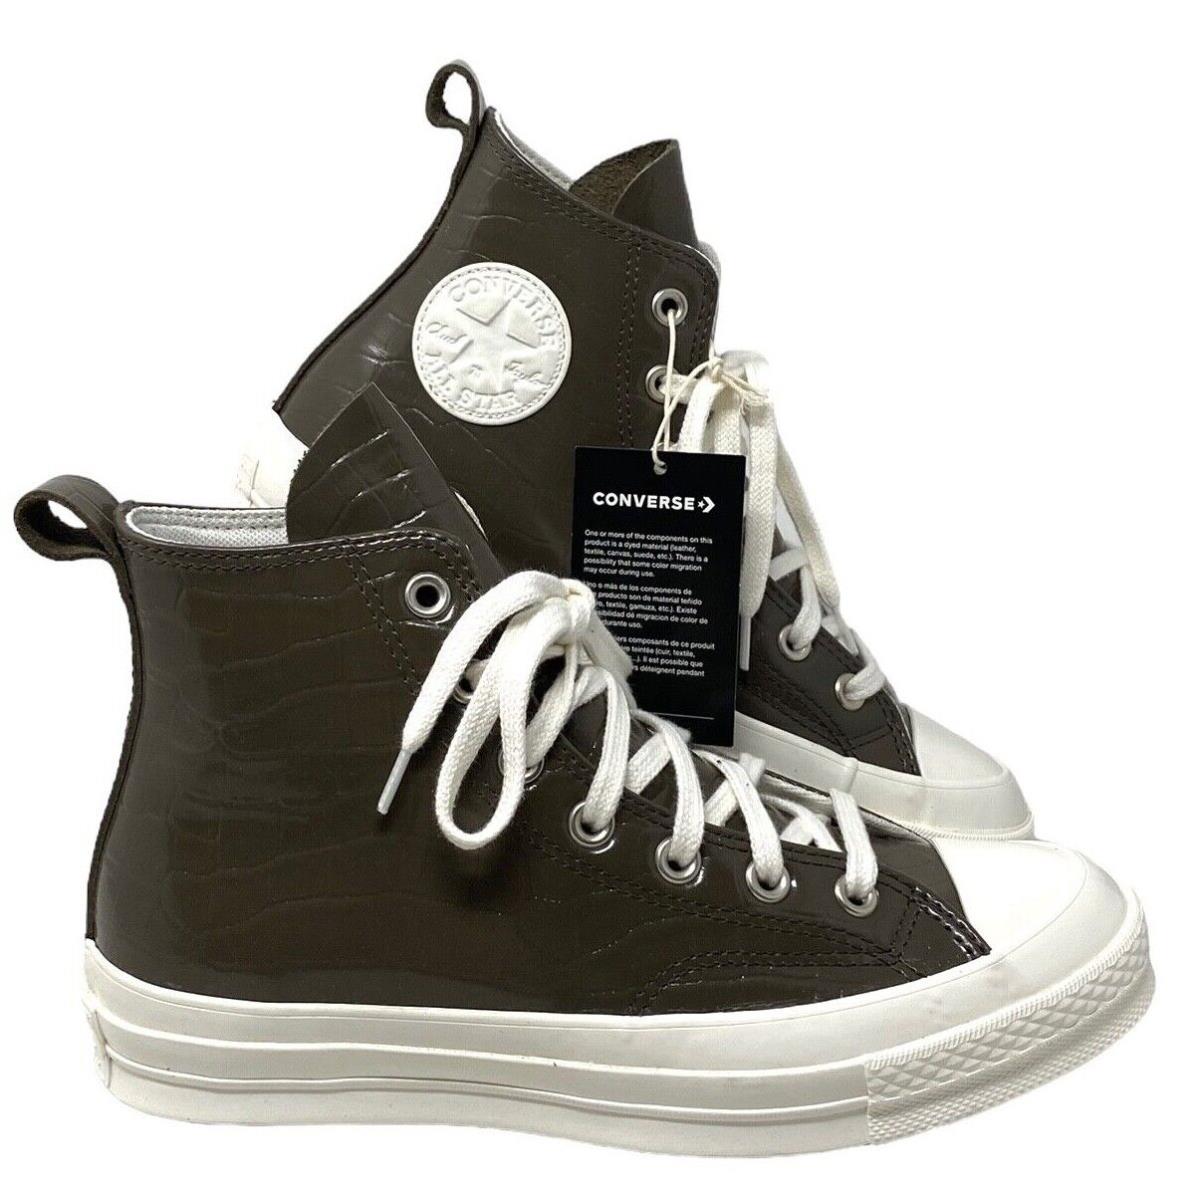 Converse Chuck 70 Skate High Shoes Brown Women`s Size Leather Sneakers A07656C